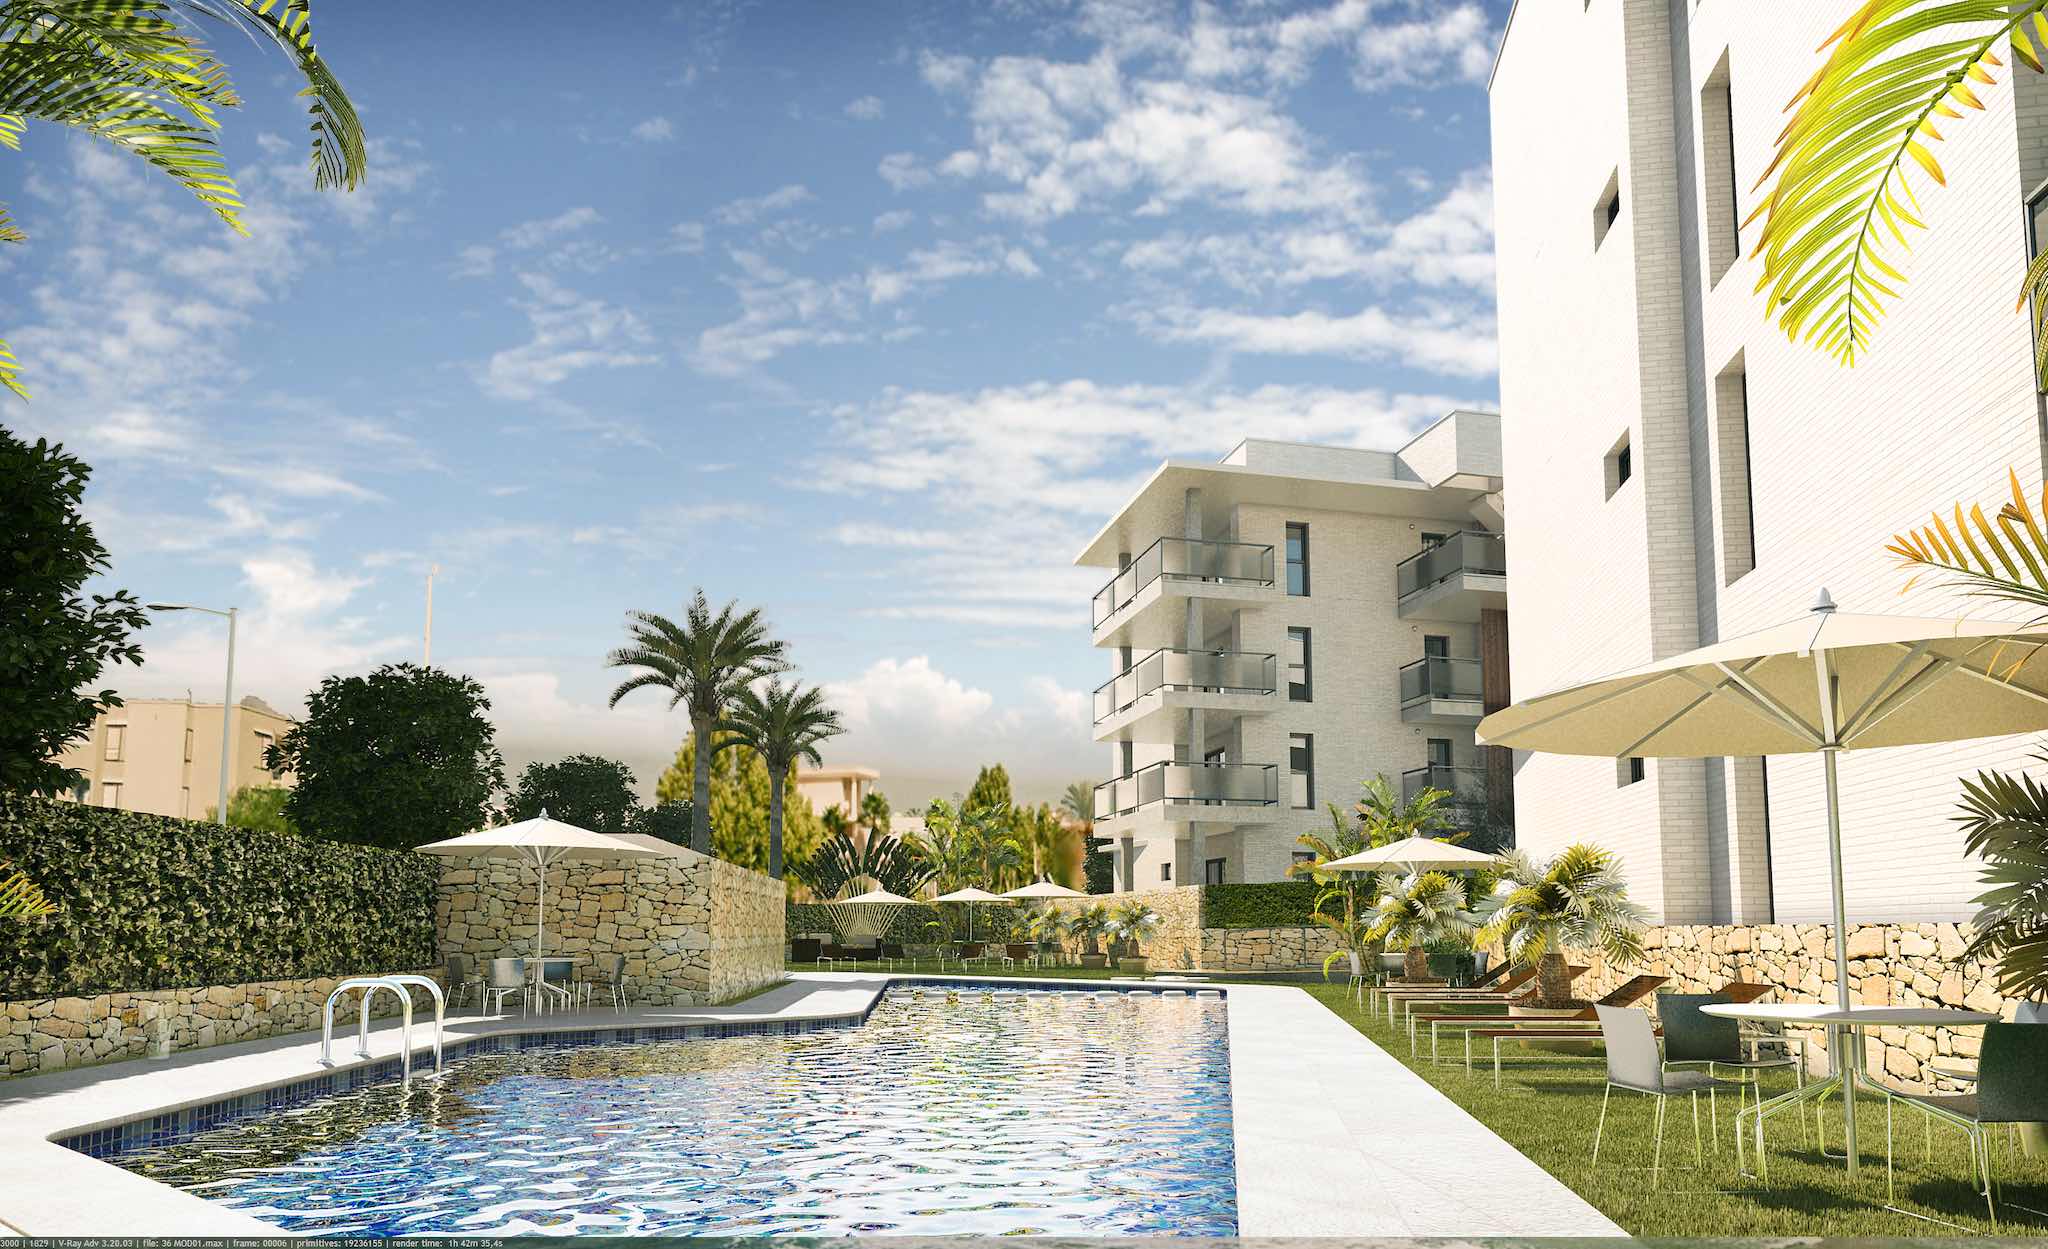 Taylor Wimpey España's new development for sale in Javea, Arenal Beach